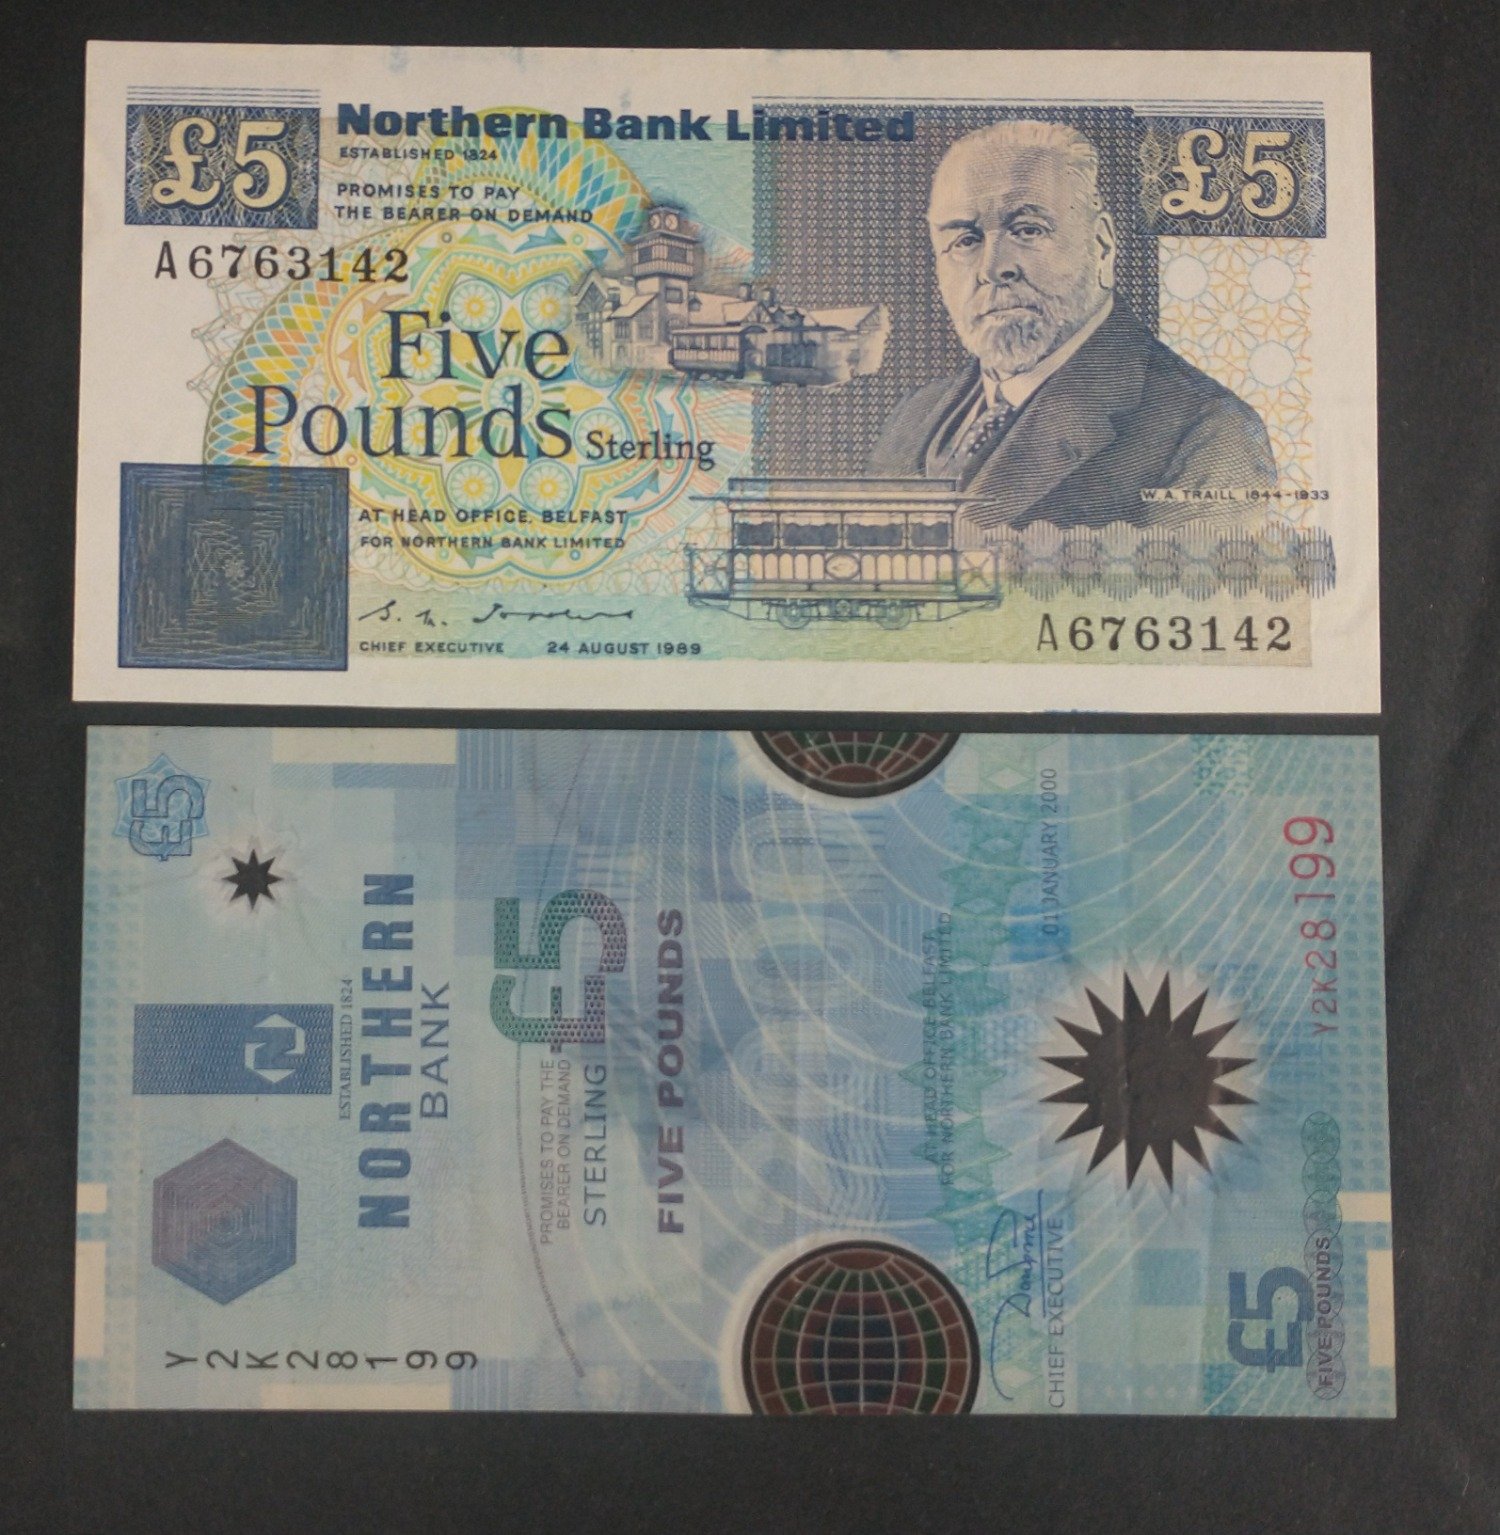 A NORTHERN BANK LIMITED five pound sterling note from 1989 and a polymer NORTHERN BANK five pound